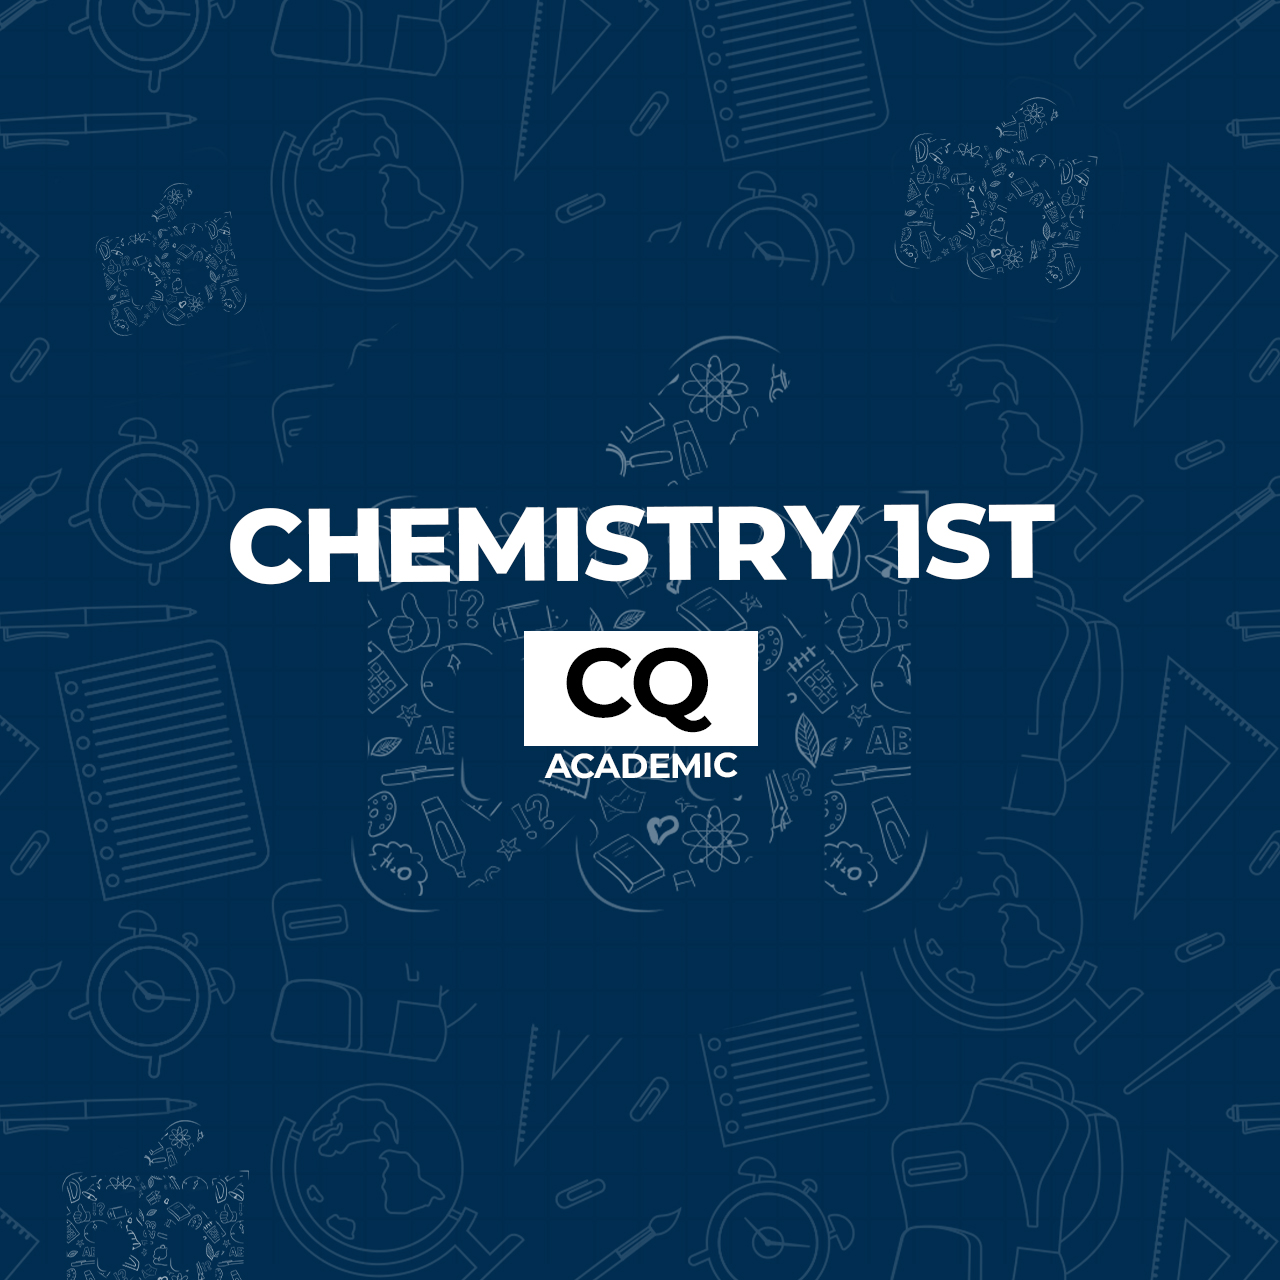 <p>HSC Chemistry 1st Paper Digital Test Paper In this digital test paper, you will find all the board questions from the Chemistry 1st Paper from 2017 to 2023 for all boards. Practice board CQ questions now on Chorcha to secure A+ in HSC exam and stay ahead in admission</p>